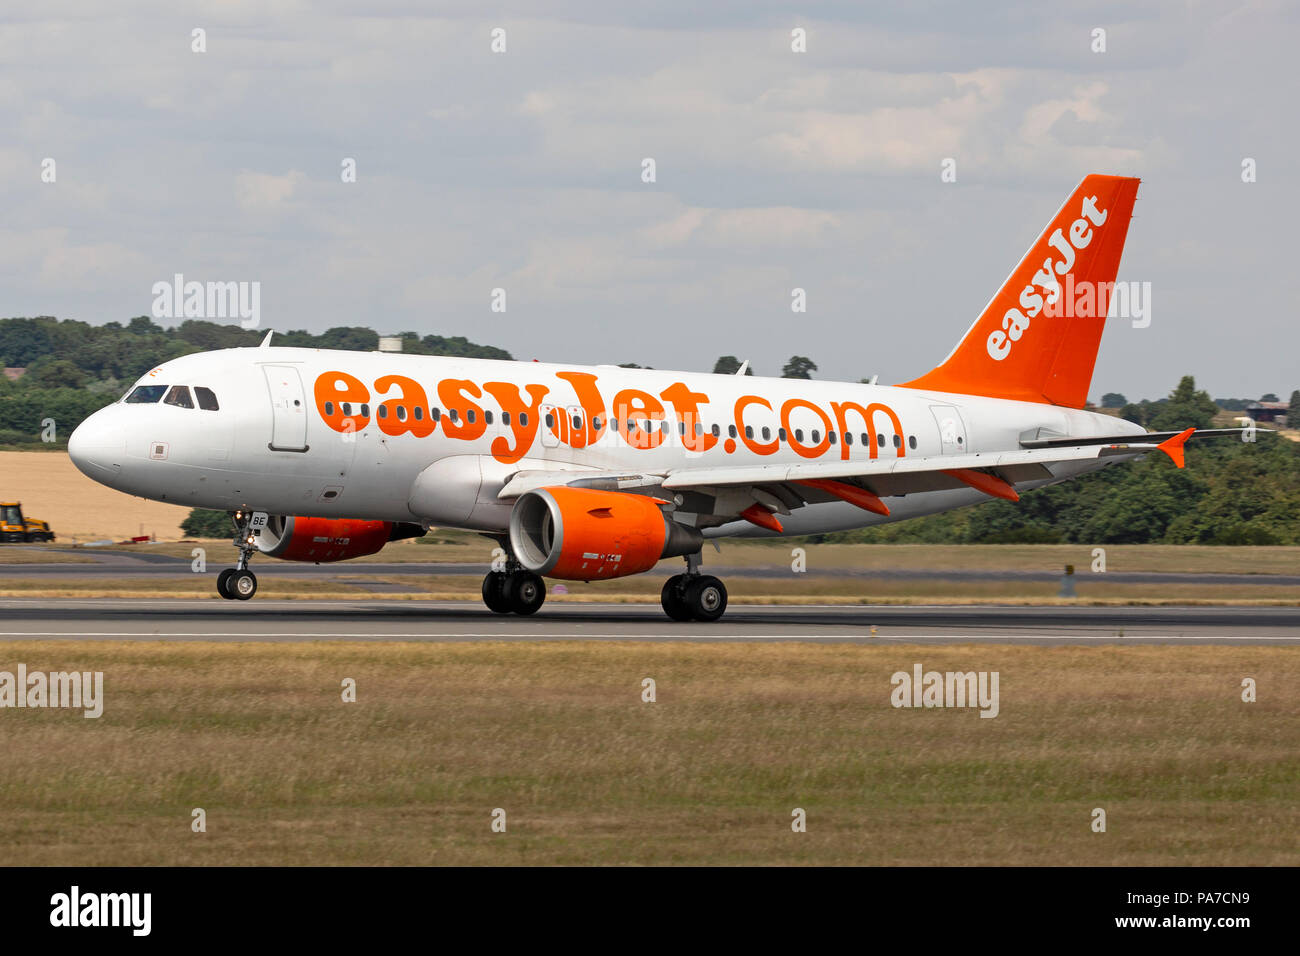 An easy jet Airbus A319 aircraft, G-EZBE, touching down at London Luton Airport in England. Stock Photo